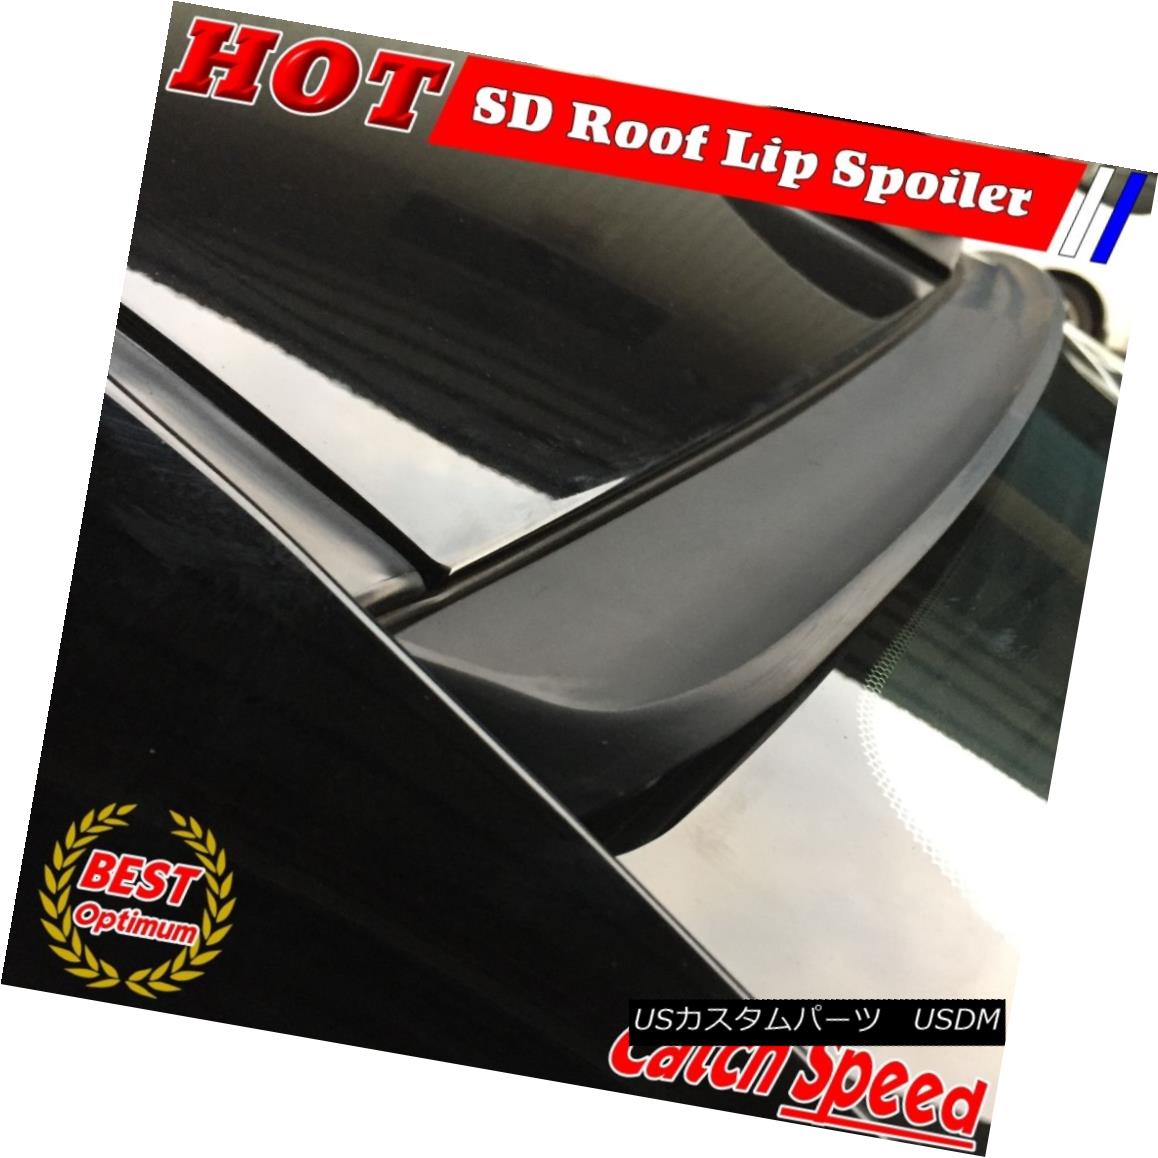 ѡ Painted SD Style Rear Roof Spoiler For Mitsubishi ECLIPSE 4G Coupe 2006~2010 ɩECLIPSE 4GѤSDꥢ롼եݥ顼2006?2010